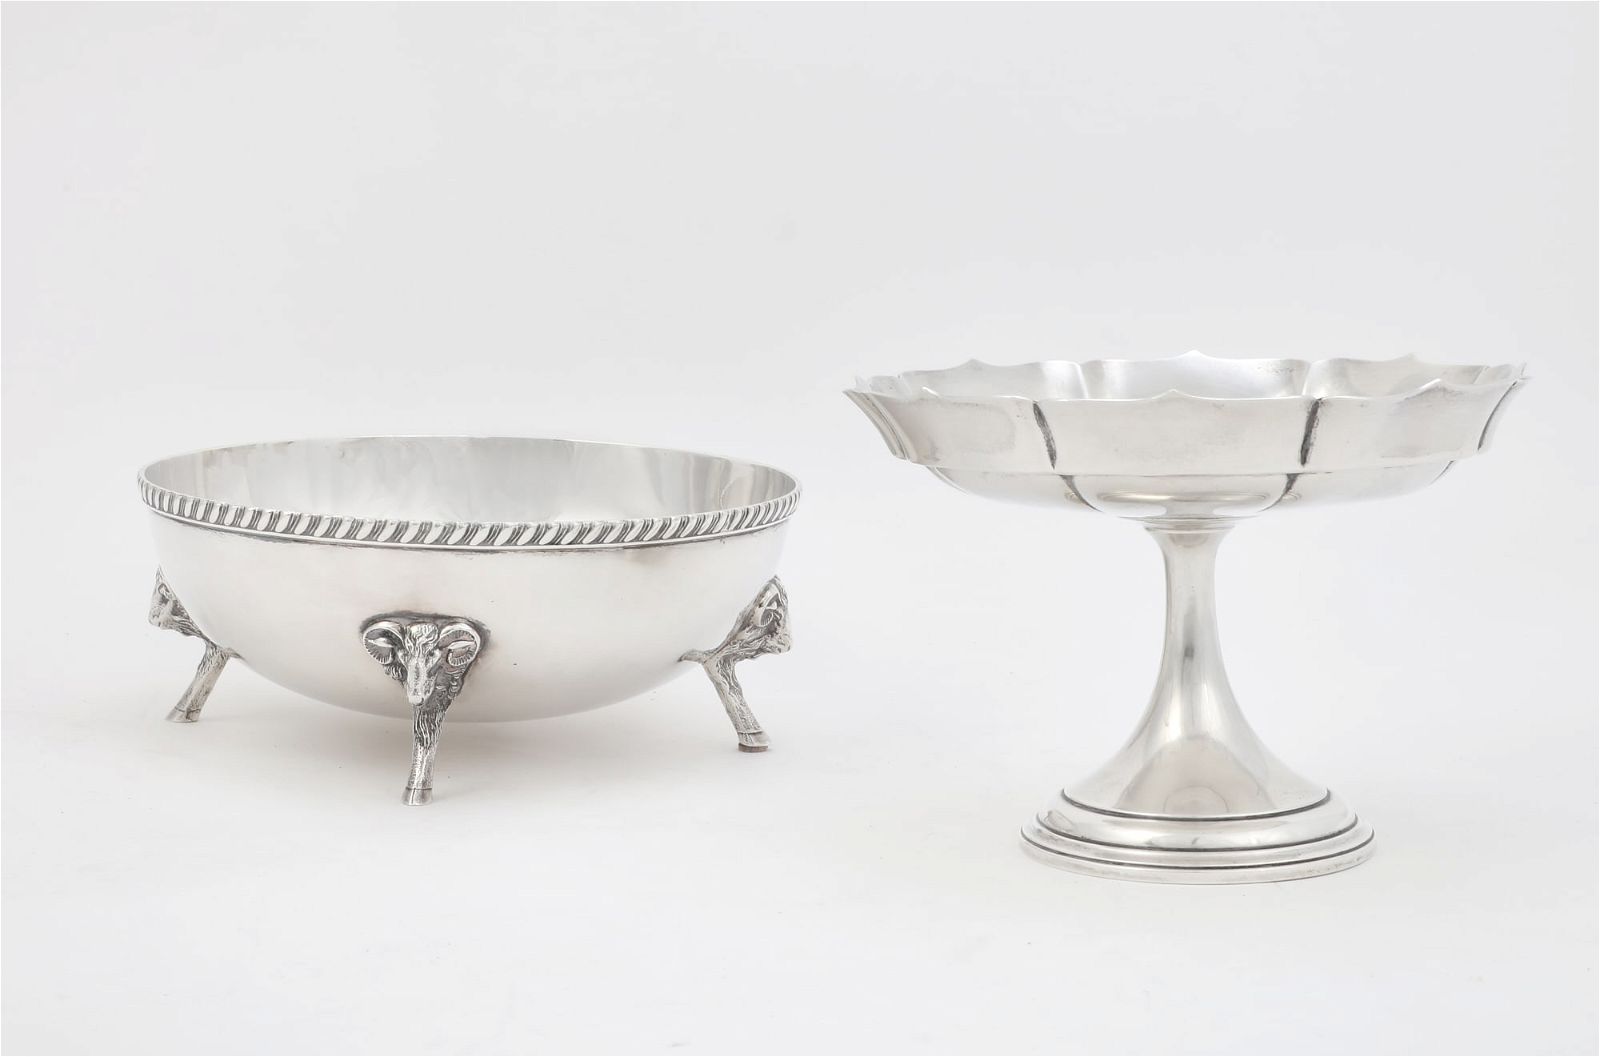 TWO GORHAM STERLING SILVER BOWLS,